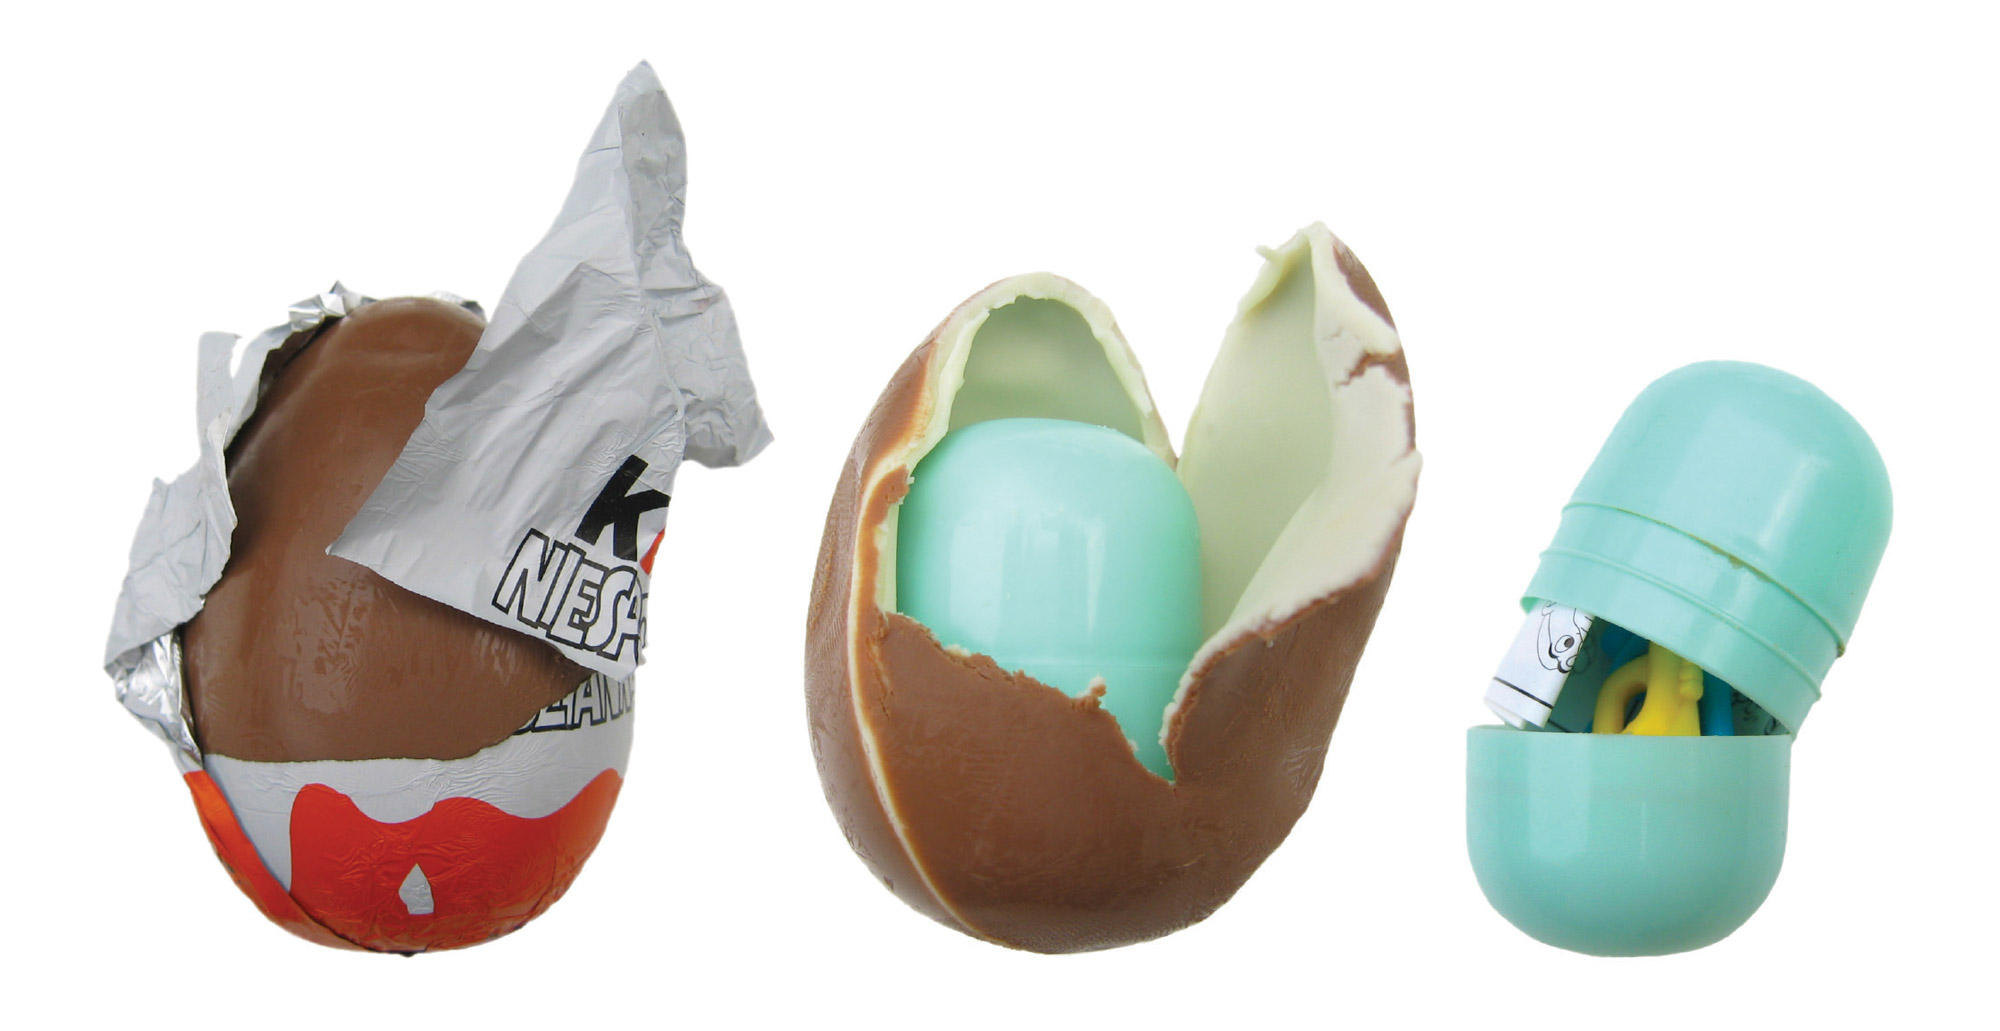 A photograph of a Kinder egg in various stages of being unwrapped.